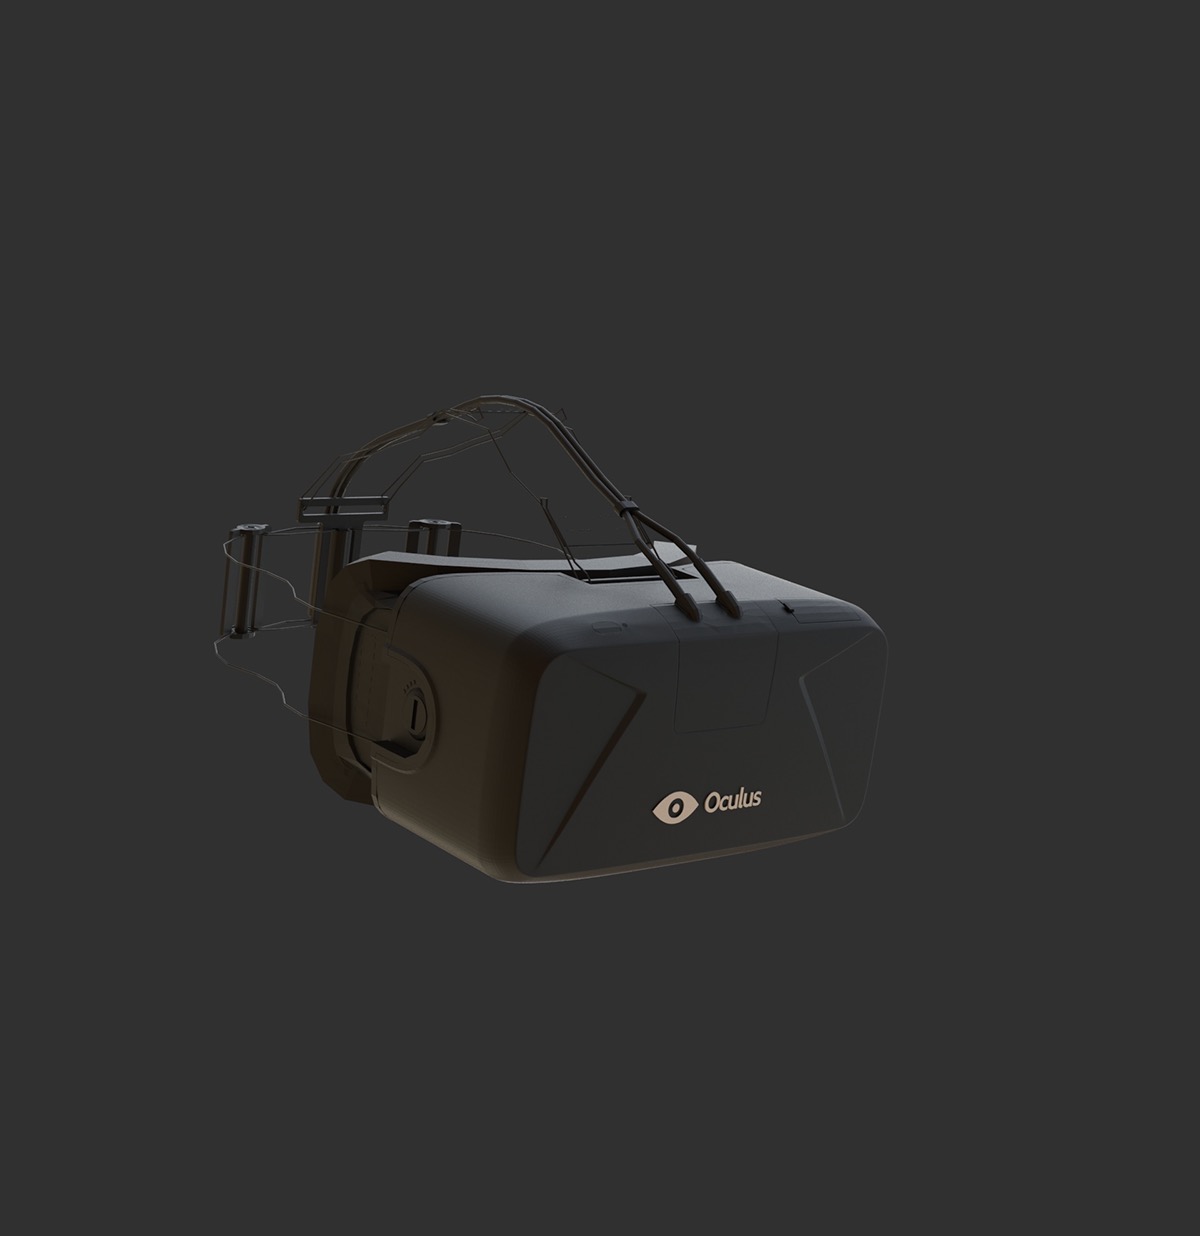 Unreal Game Engine leap motion Oculus vr Virtual reality